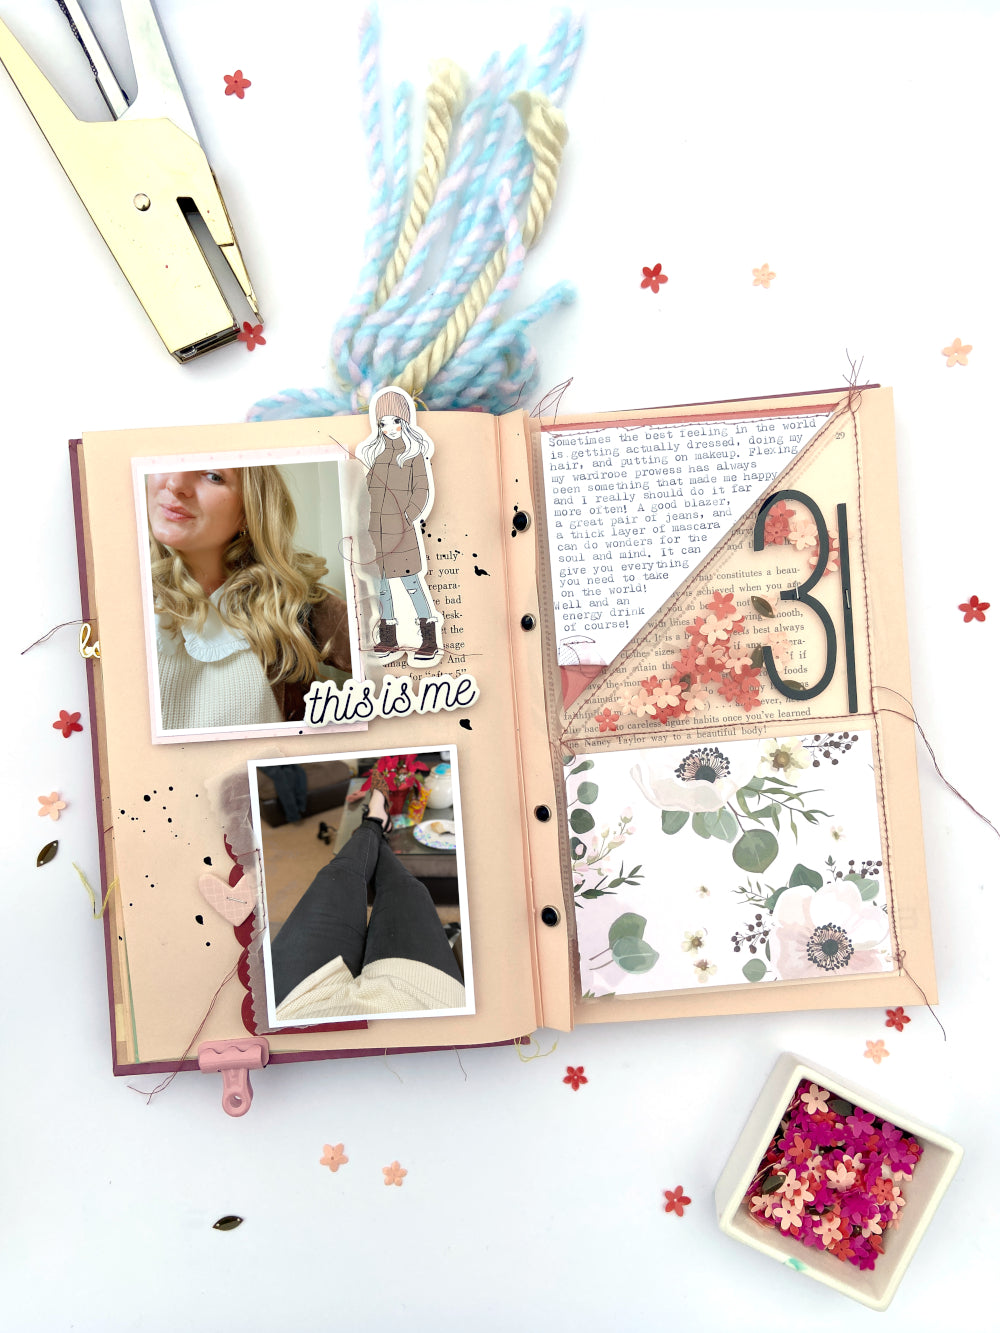 “This is Me” Altered Book Spread │Mix-It Monday | Lydia Cost